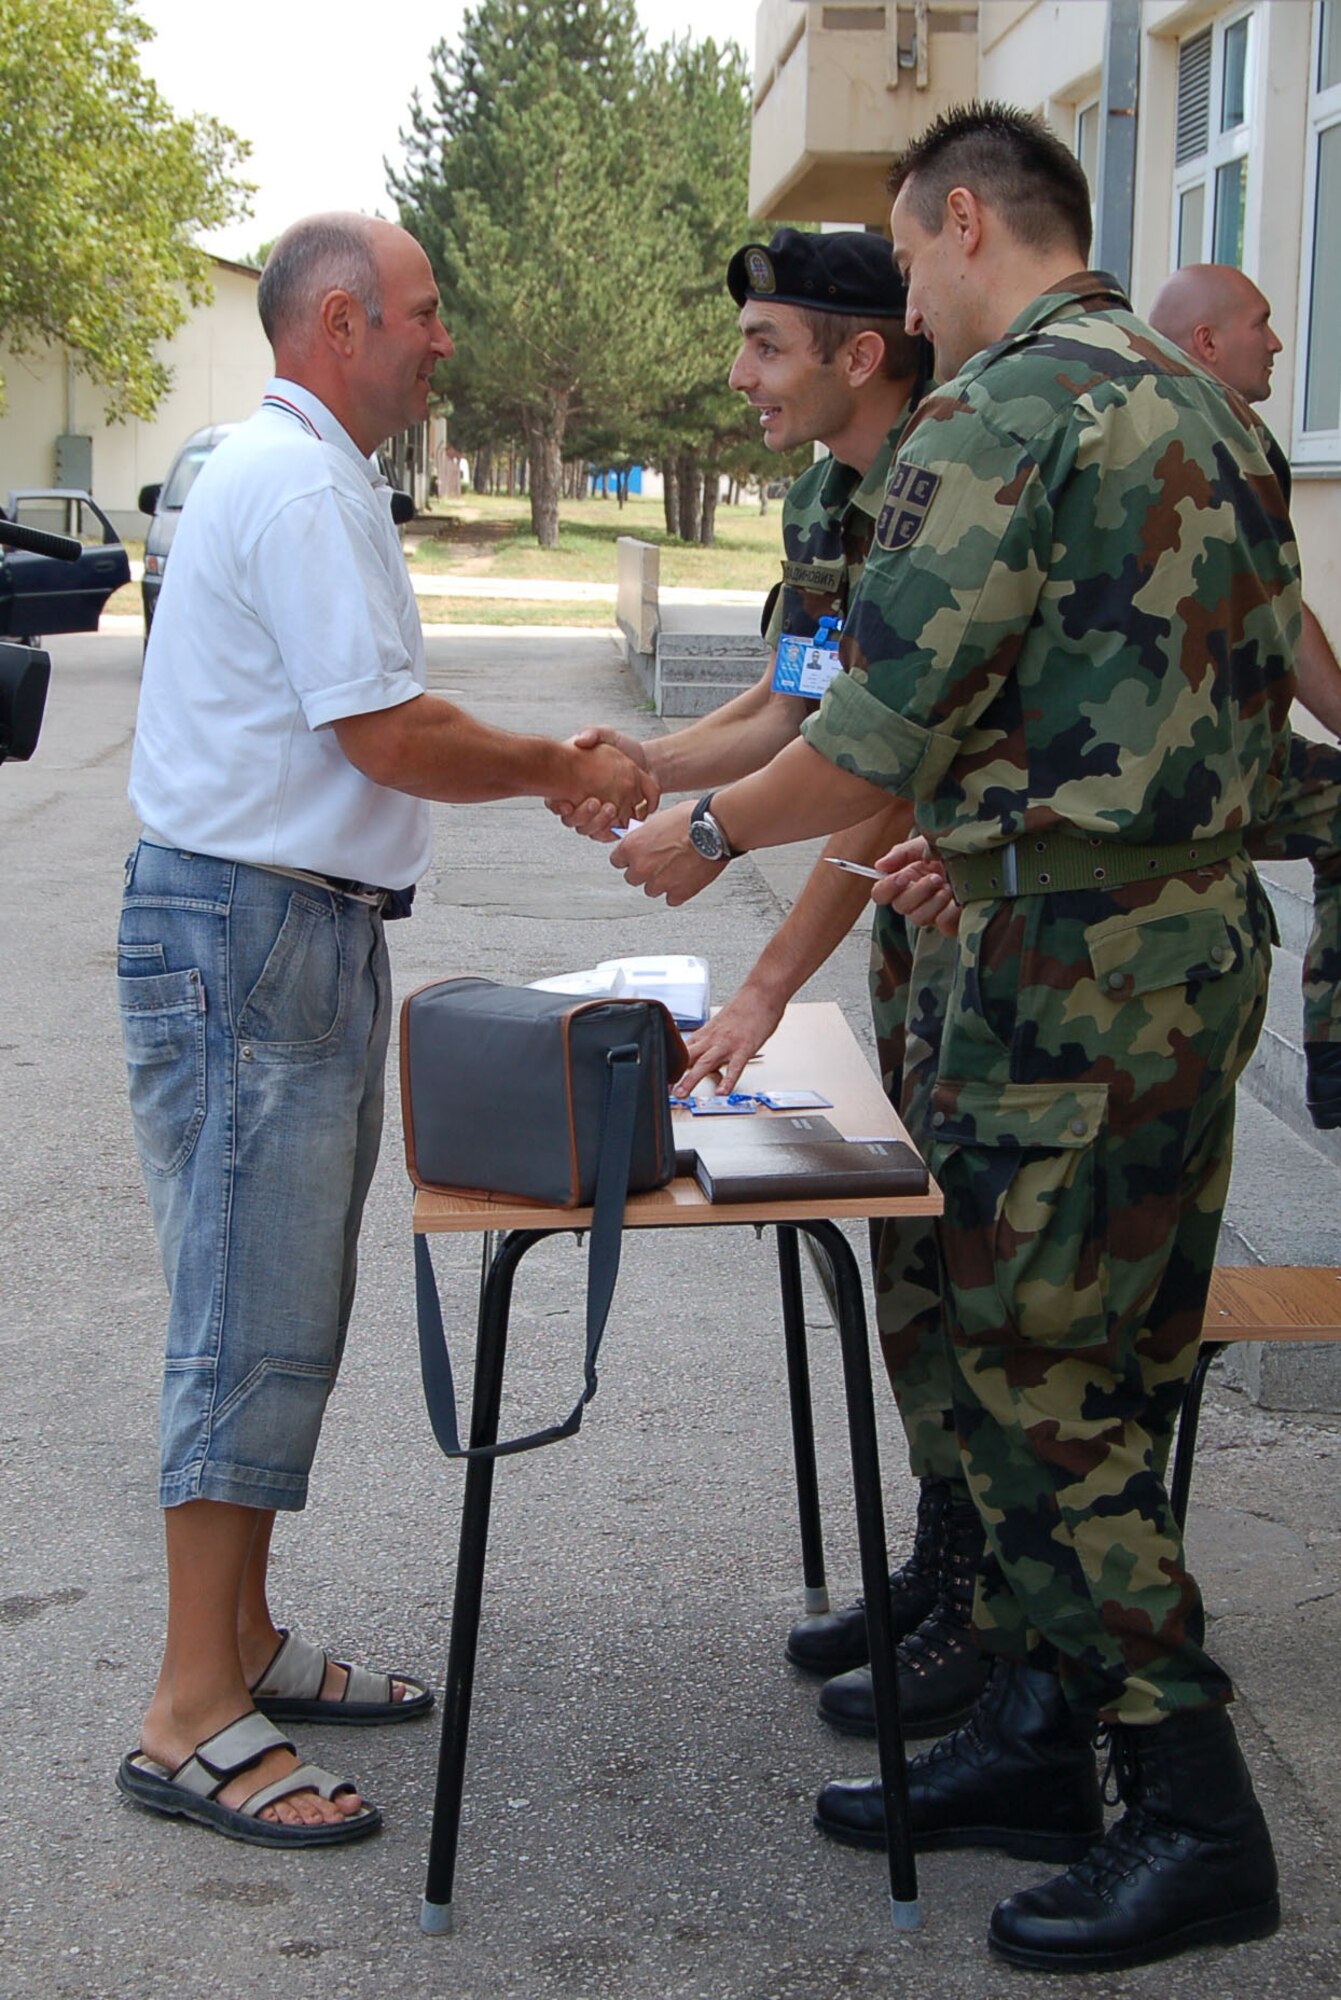 NIS, Serbia – Senior Sergeant Milos Miladinovic, Serbian Armed Forces Force Protection (left), shakes hands with a representative of the Republic of Macedonia Aug. 31 as a fellow SAF member stands by during in-processing into the military medical training exercise in Central and Eastern Europe, better known as MEDCEUR 2009, in Nis, Serbia. (U.S. Air Force photo/Senior Airman Kali L. Gradishar)